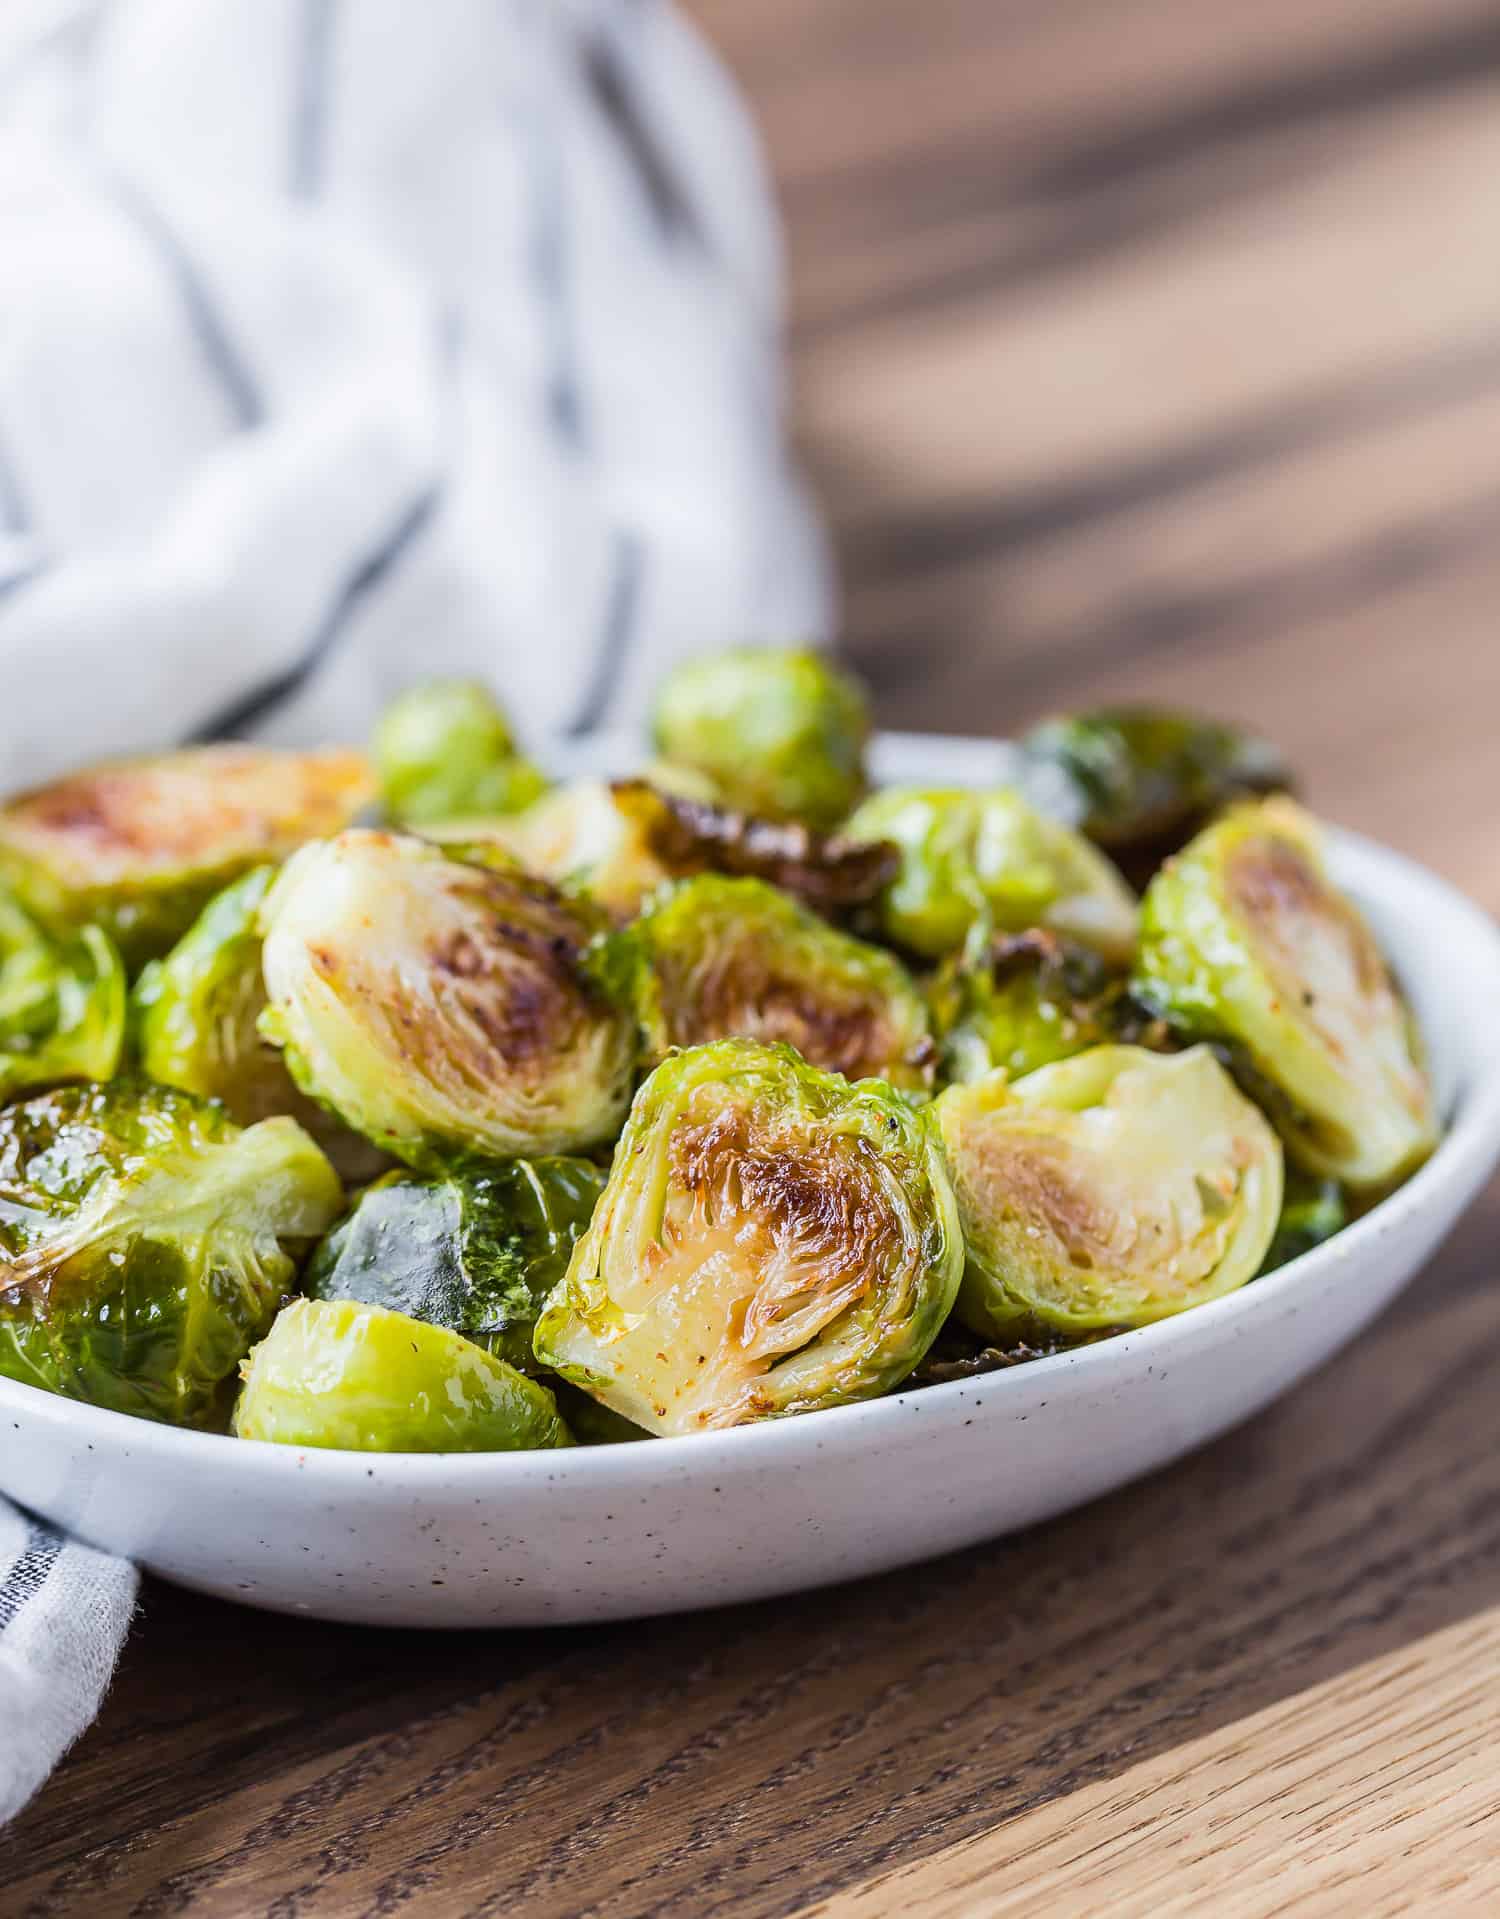 Maple cayenne roasted Brussels sprouts in small bowl.